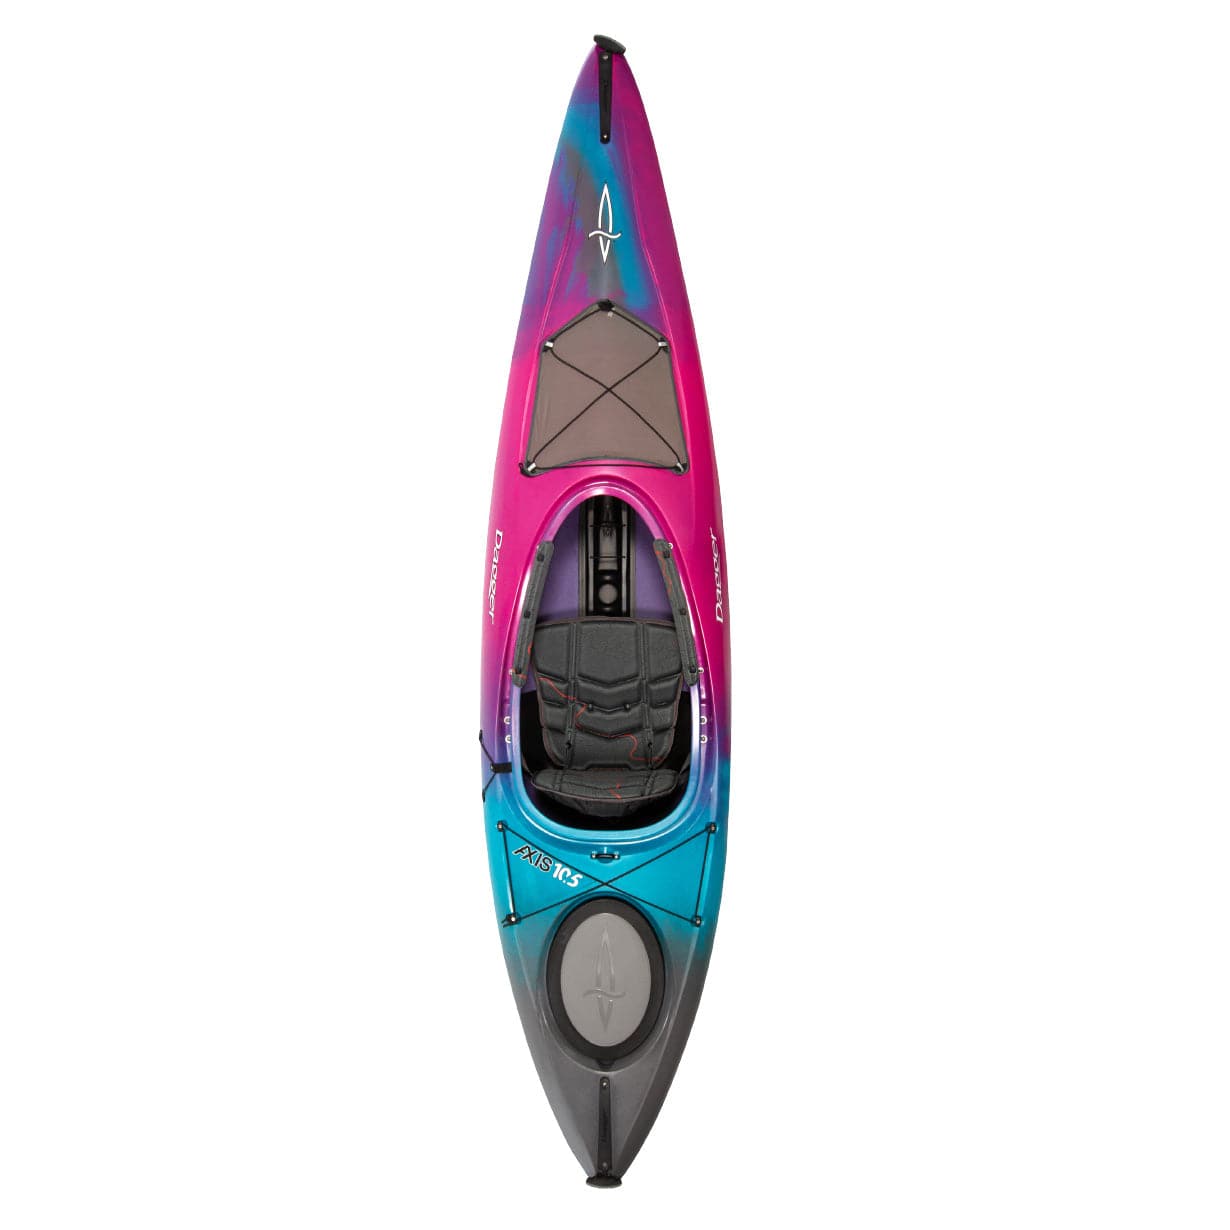 Featuring the Axis 10.5 & 12 expedition / cross over kayak, sit-inside rec / touring kayak manufactured by Dagger shown here from a second angle.